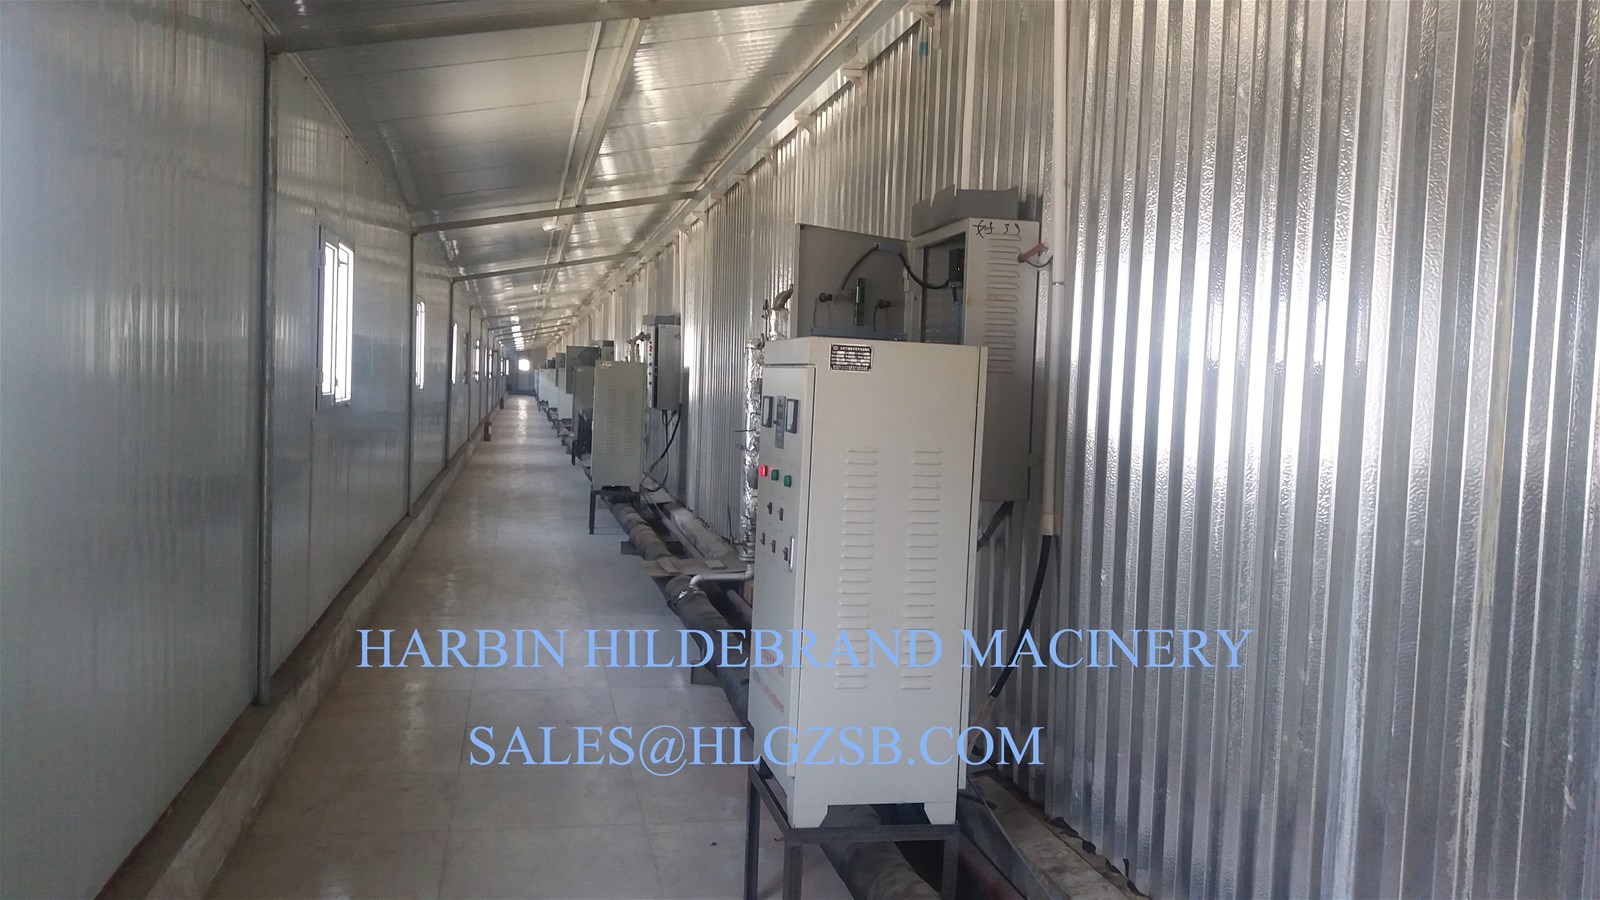 Wood drying klin China wood dryer for drying wood